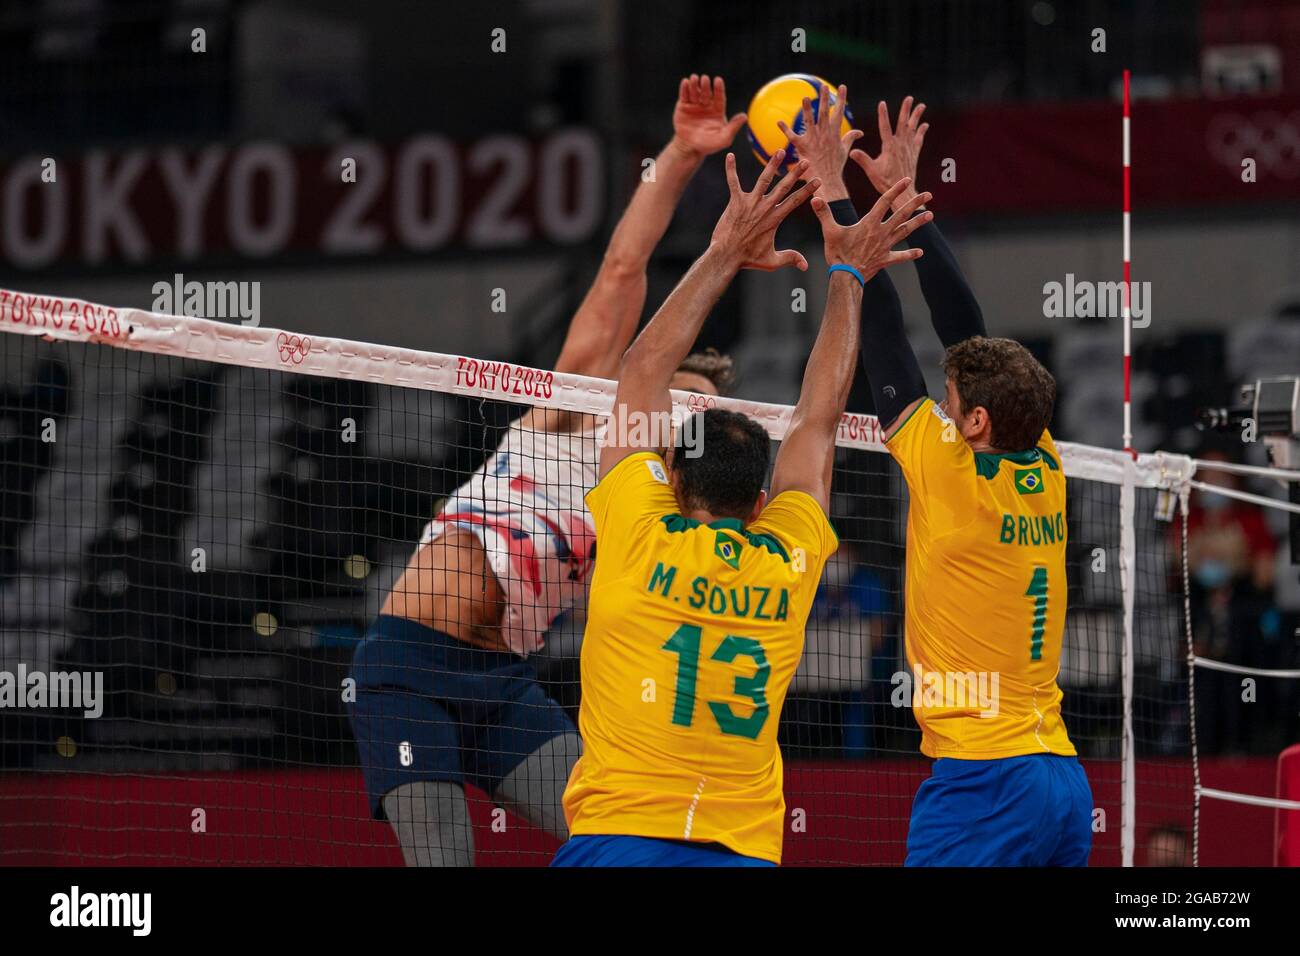 T'QUIO, TO - 30.07.2021: TOKYO 2020 OLYMPIAD TOKYO - Thomas Jaeschke from  USA during the Brazil vs USA volleyball game at the Tokyo 2020 Olympic  Games held in 2021, the game held